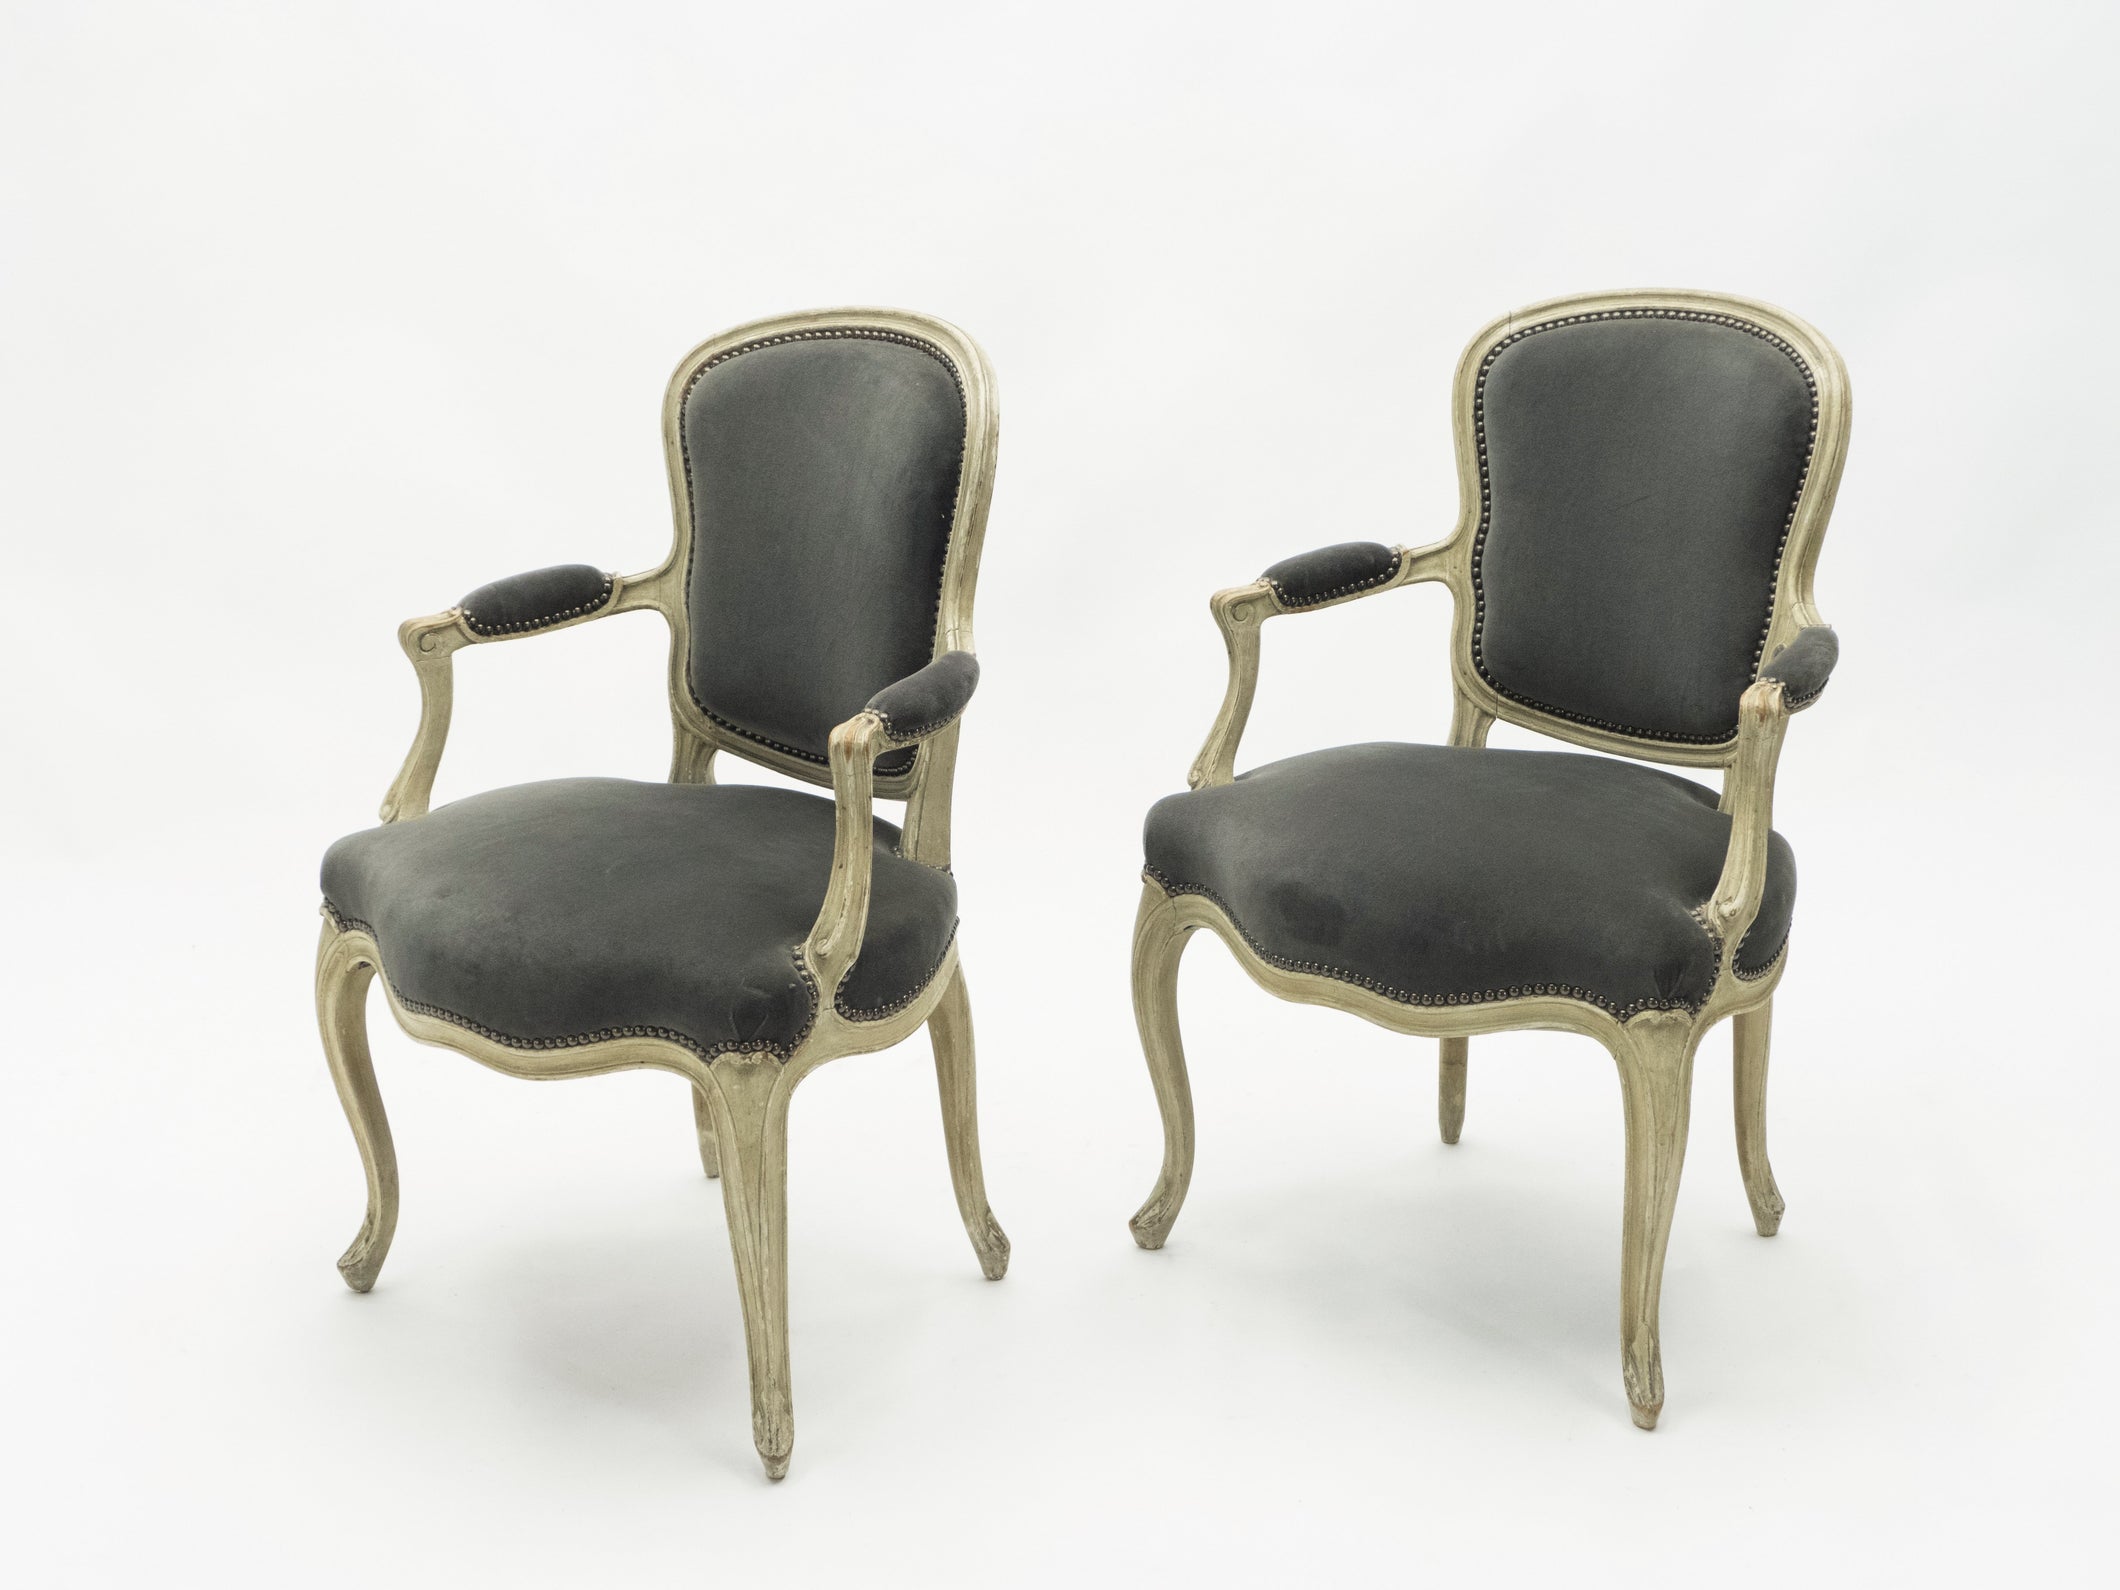 Rare pair of stamped Maison Jansen Louis XV neoclassical armchairs 1940s